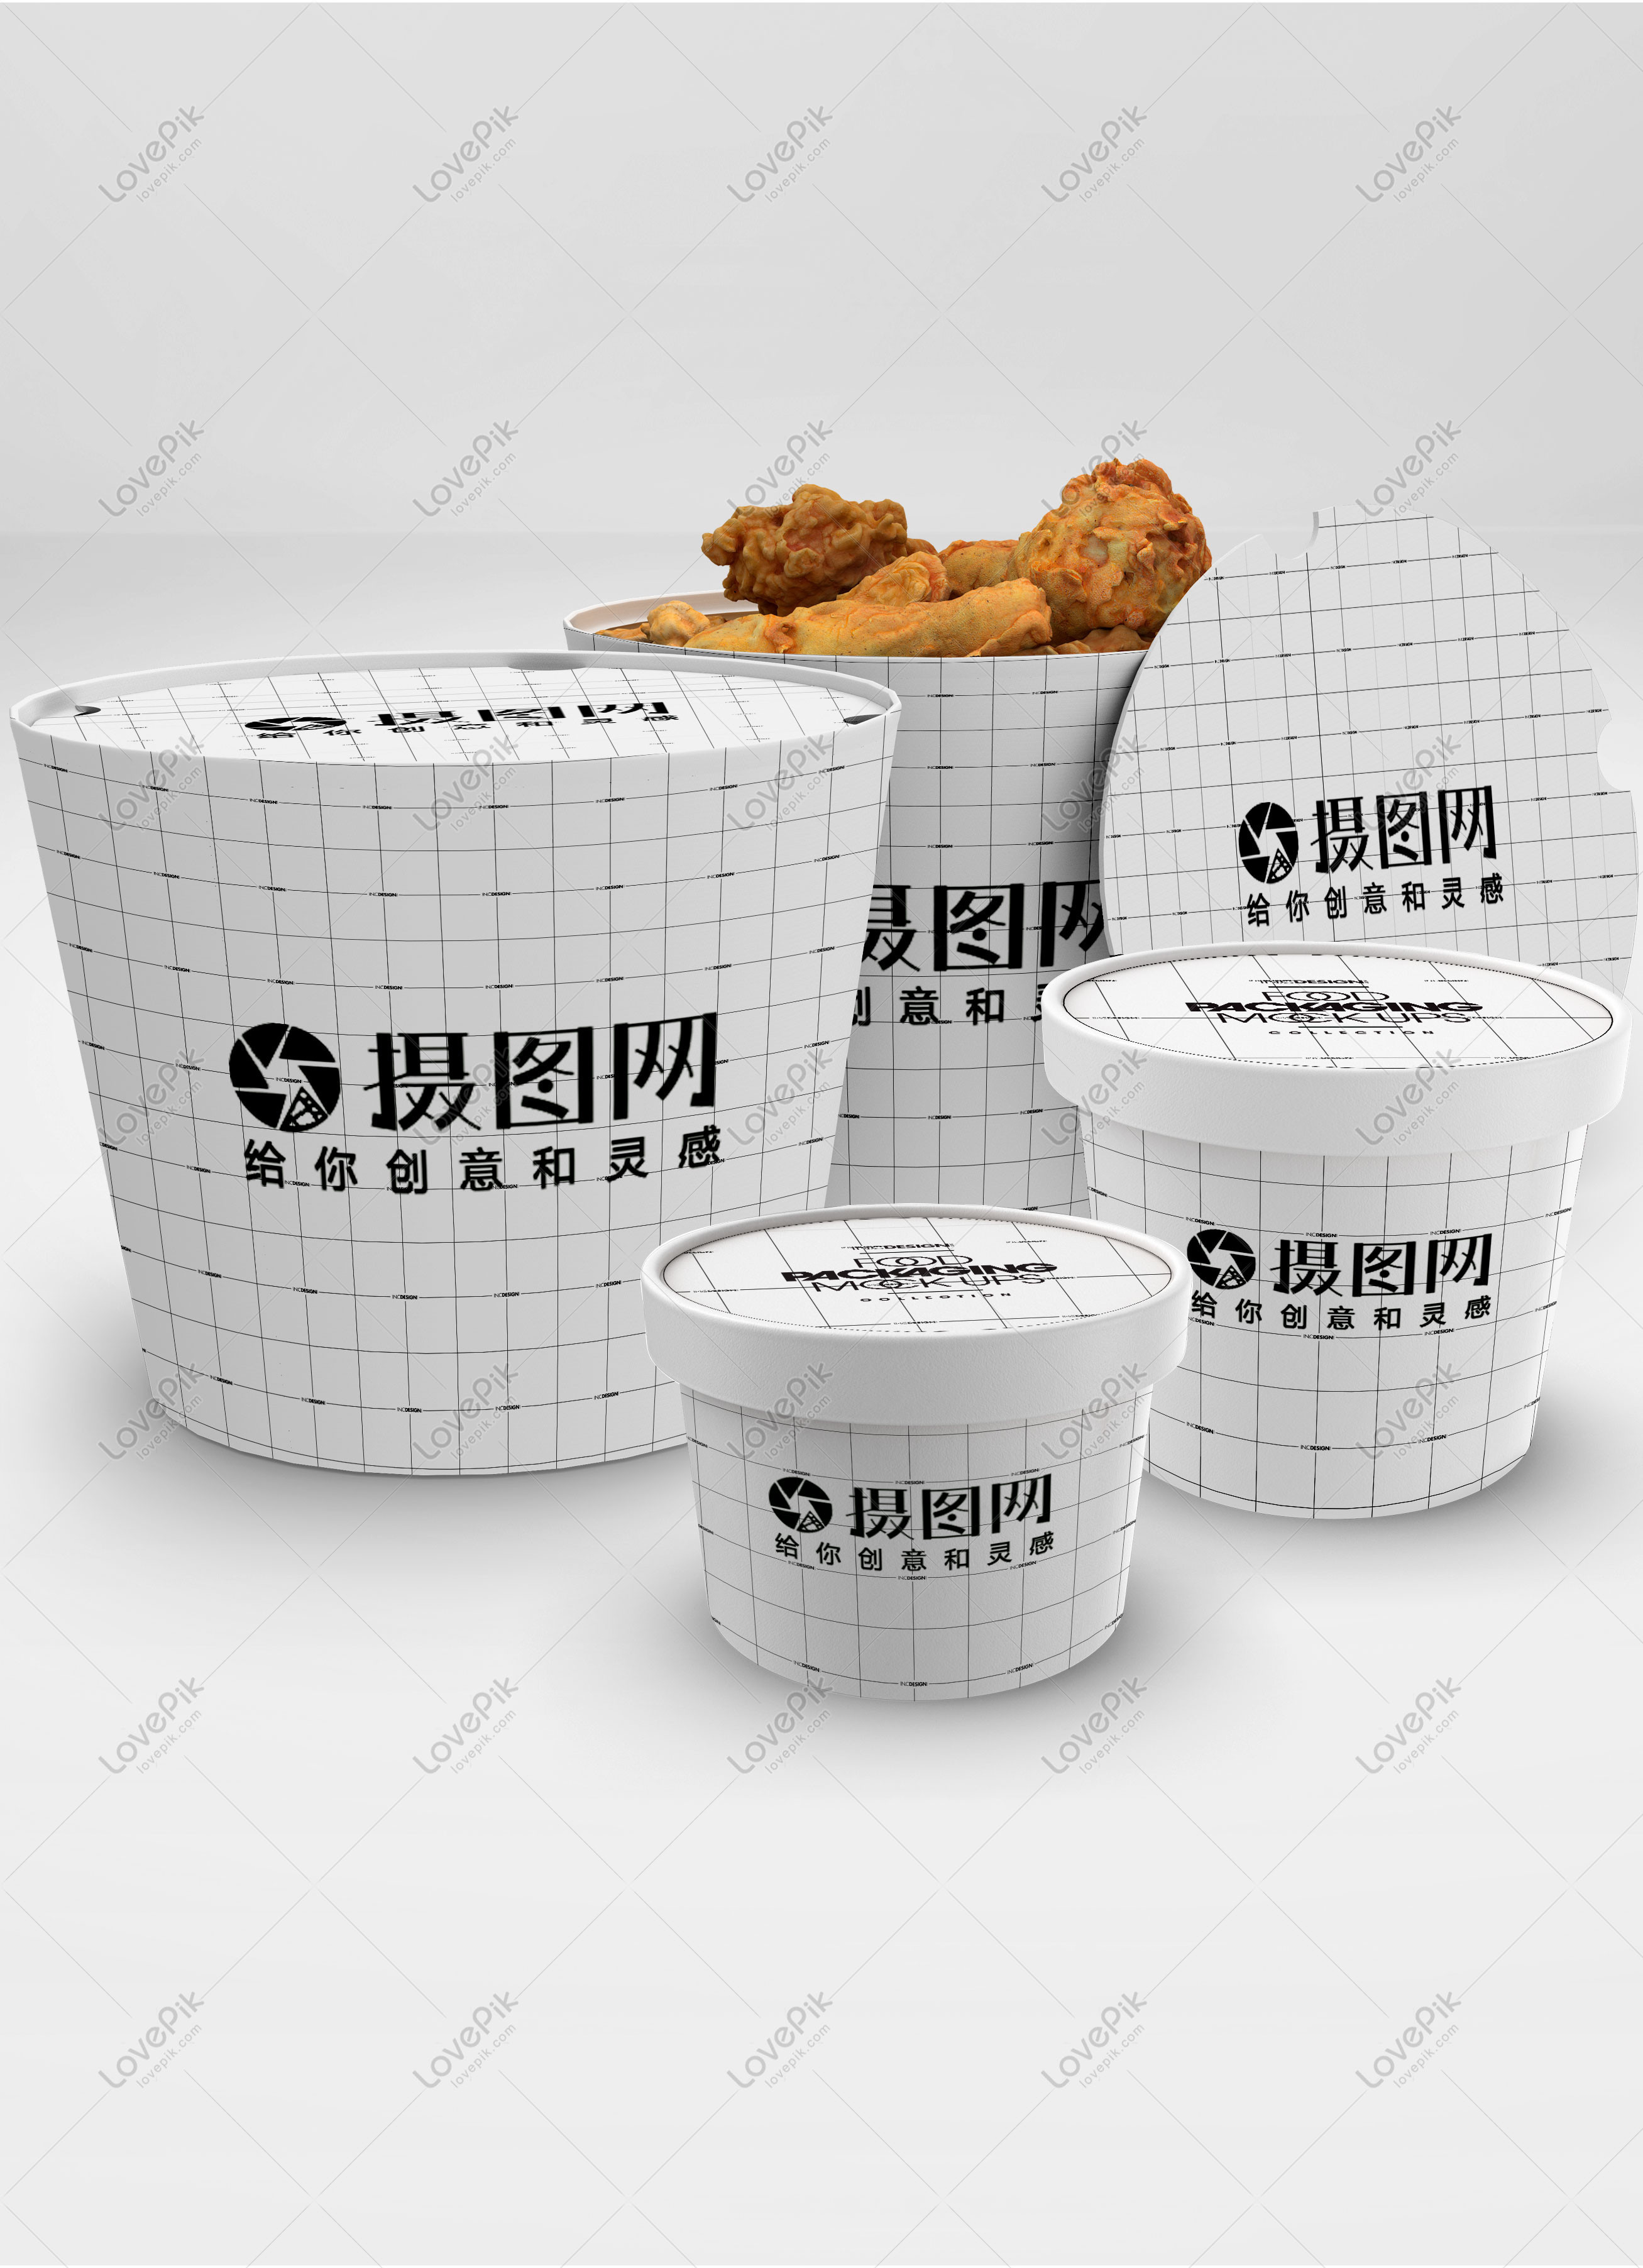 Download Fast food box packaging mockup template image_picture free ...